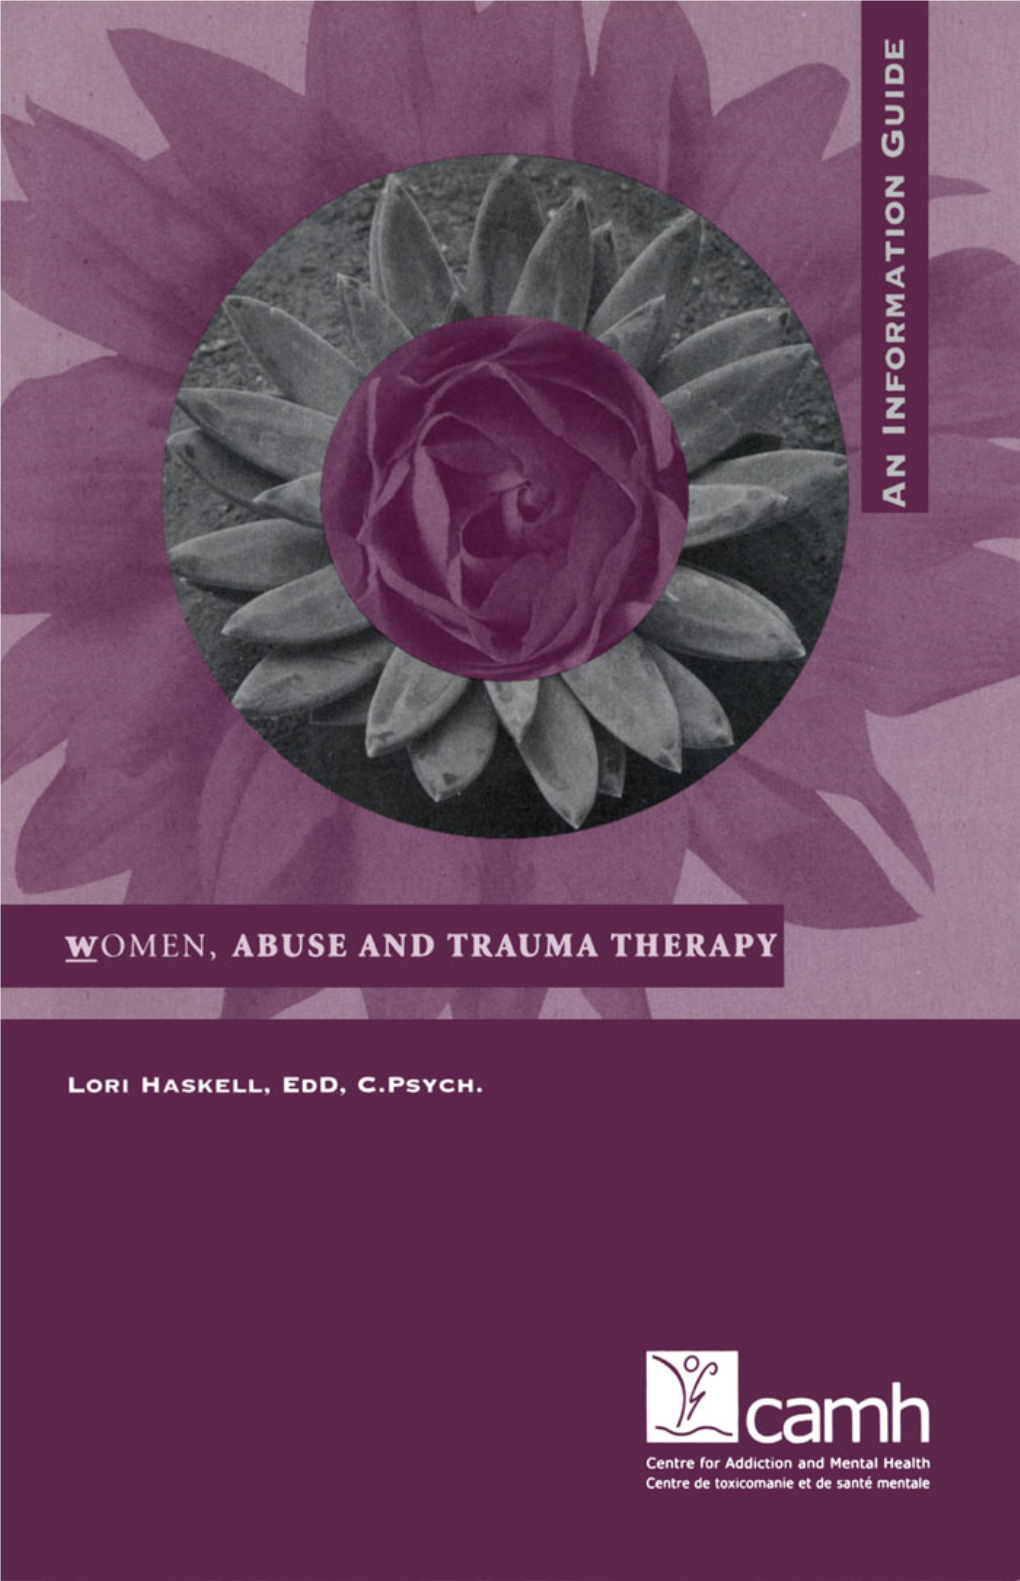 Women, Abuse and Trauma Therapy: an Information Guide for Women and Their Families